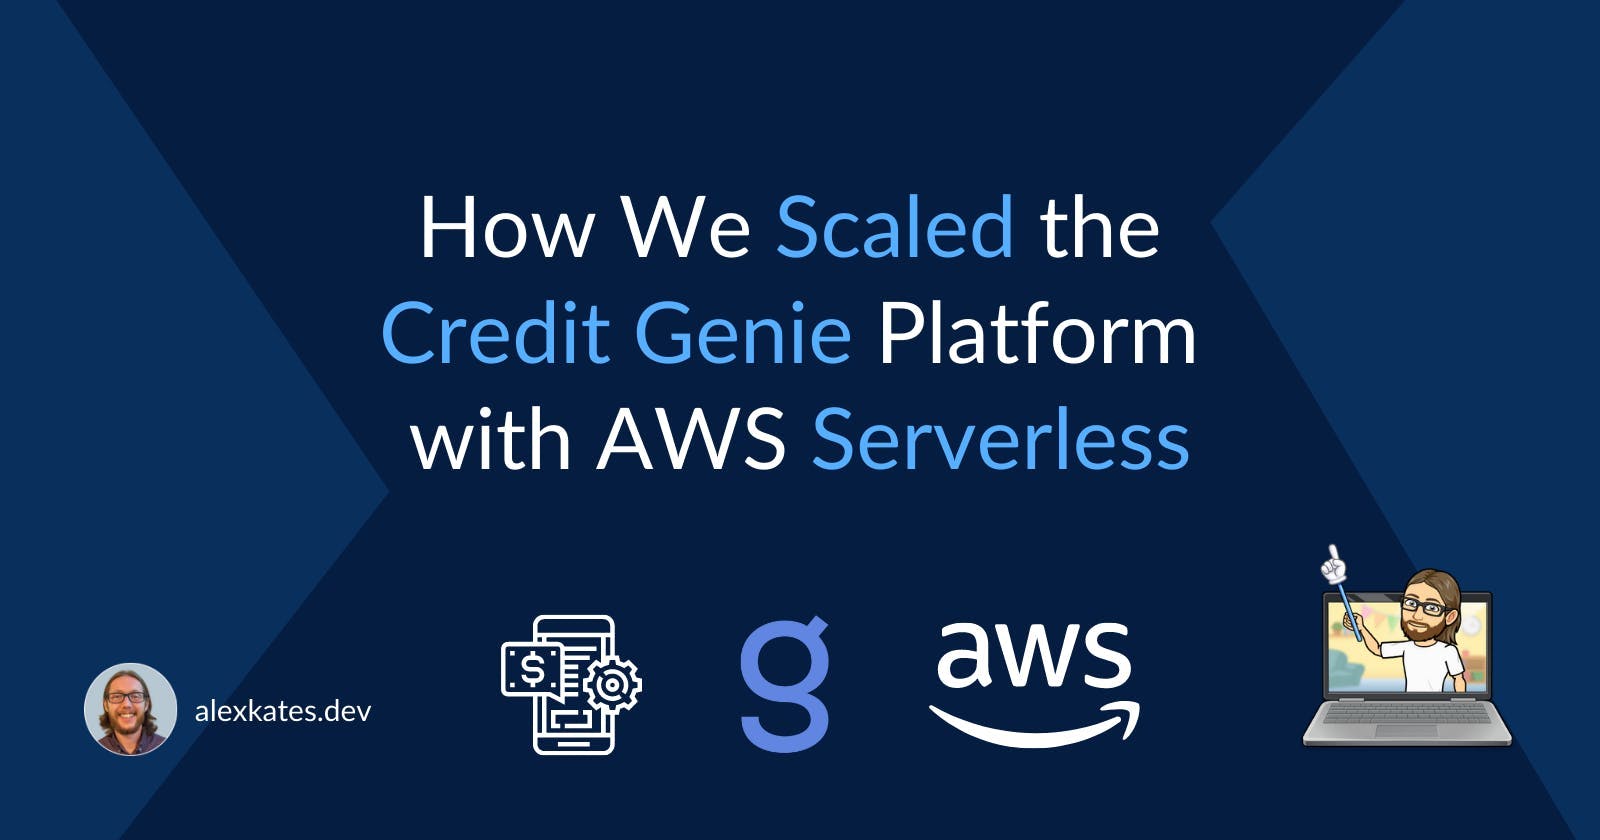 How We Scaled the Credit Genie Platform with AWS Serverless